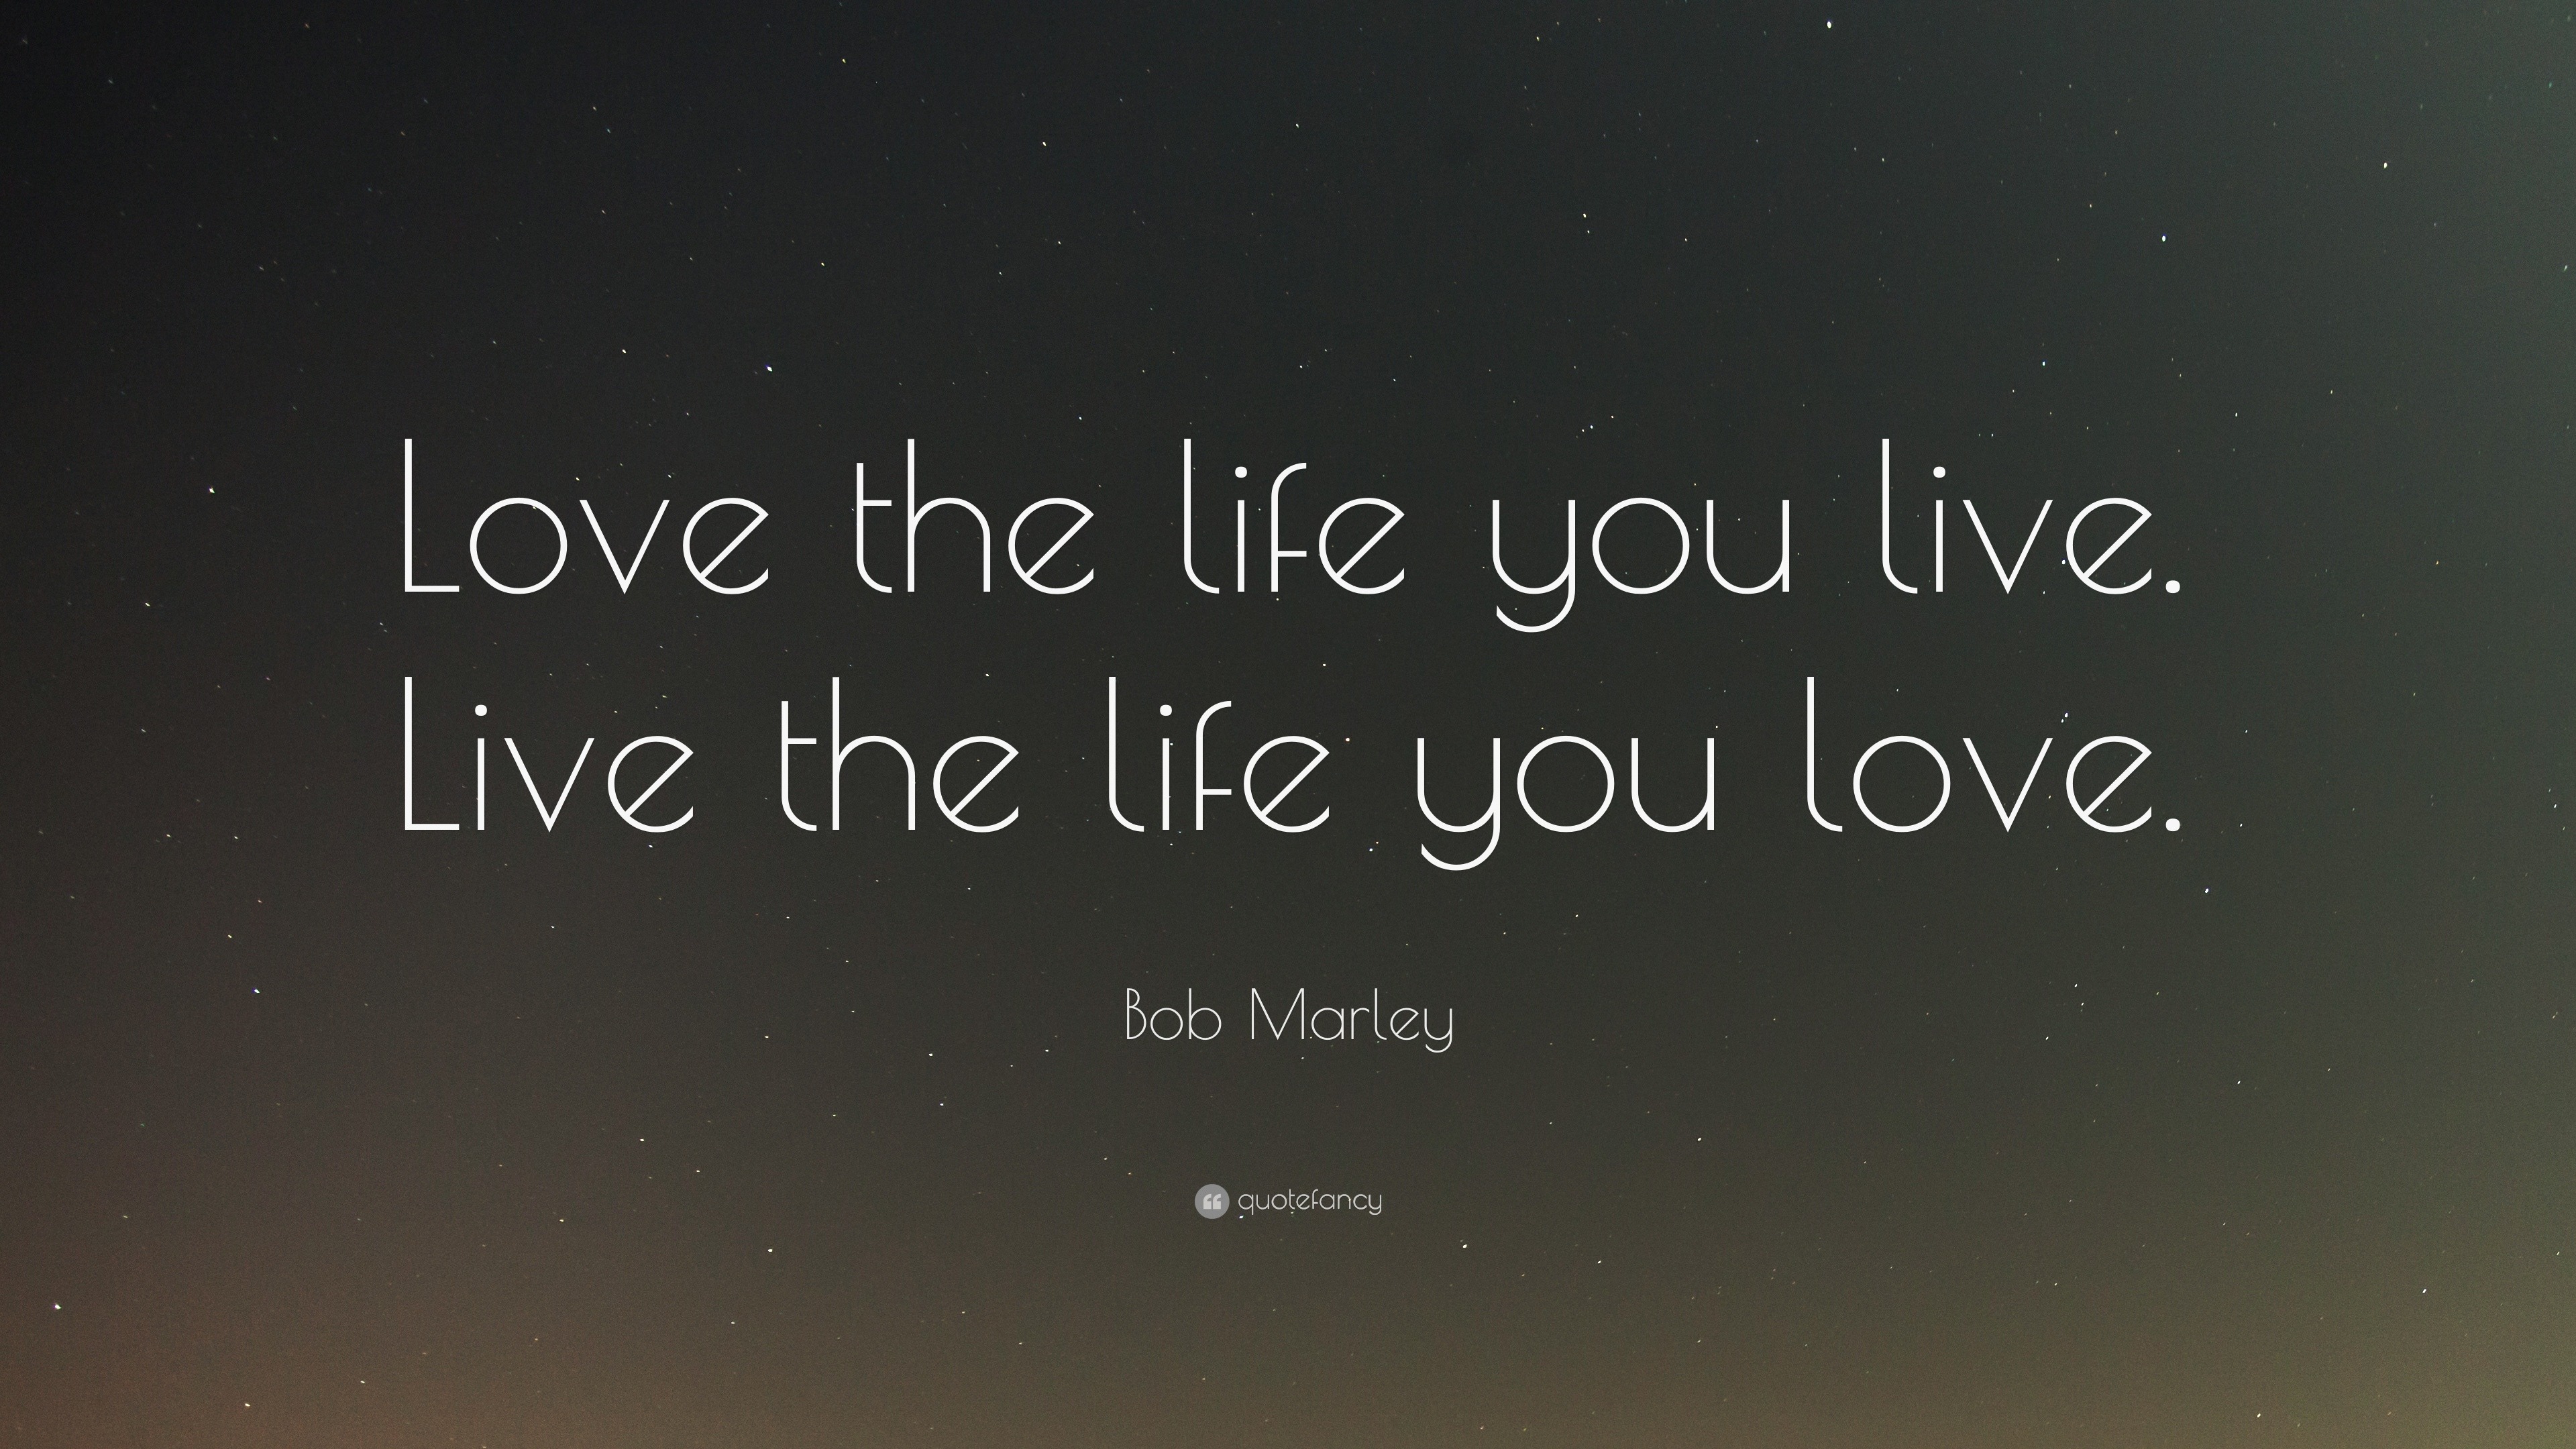 Bob Marley Quote “Love the life you live Live the life you love